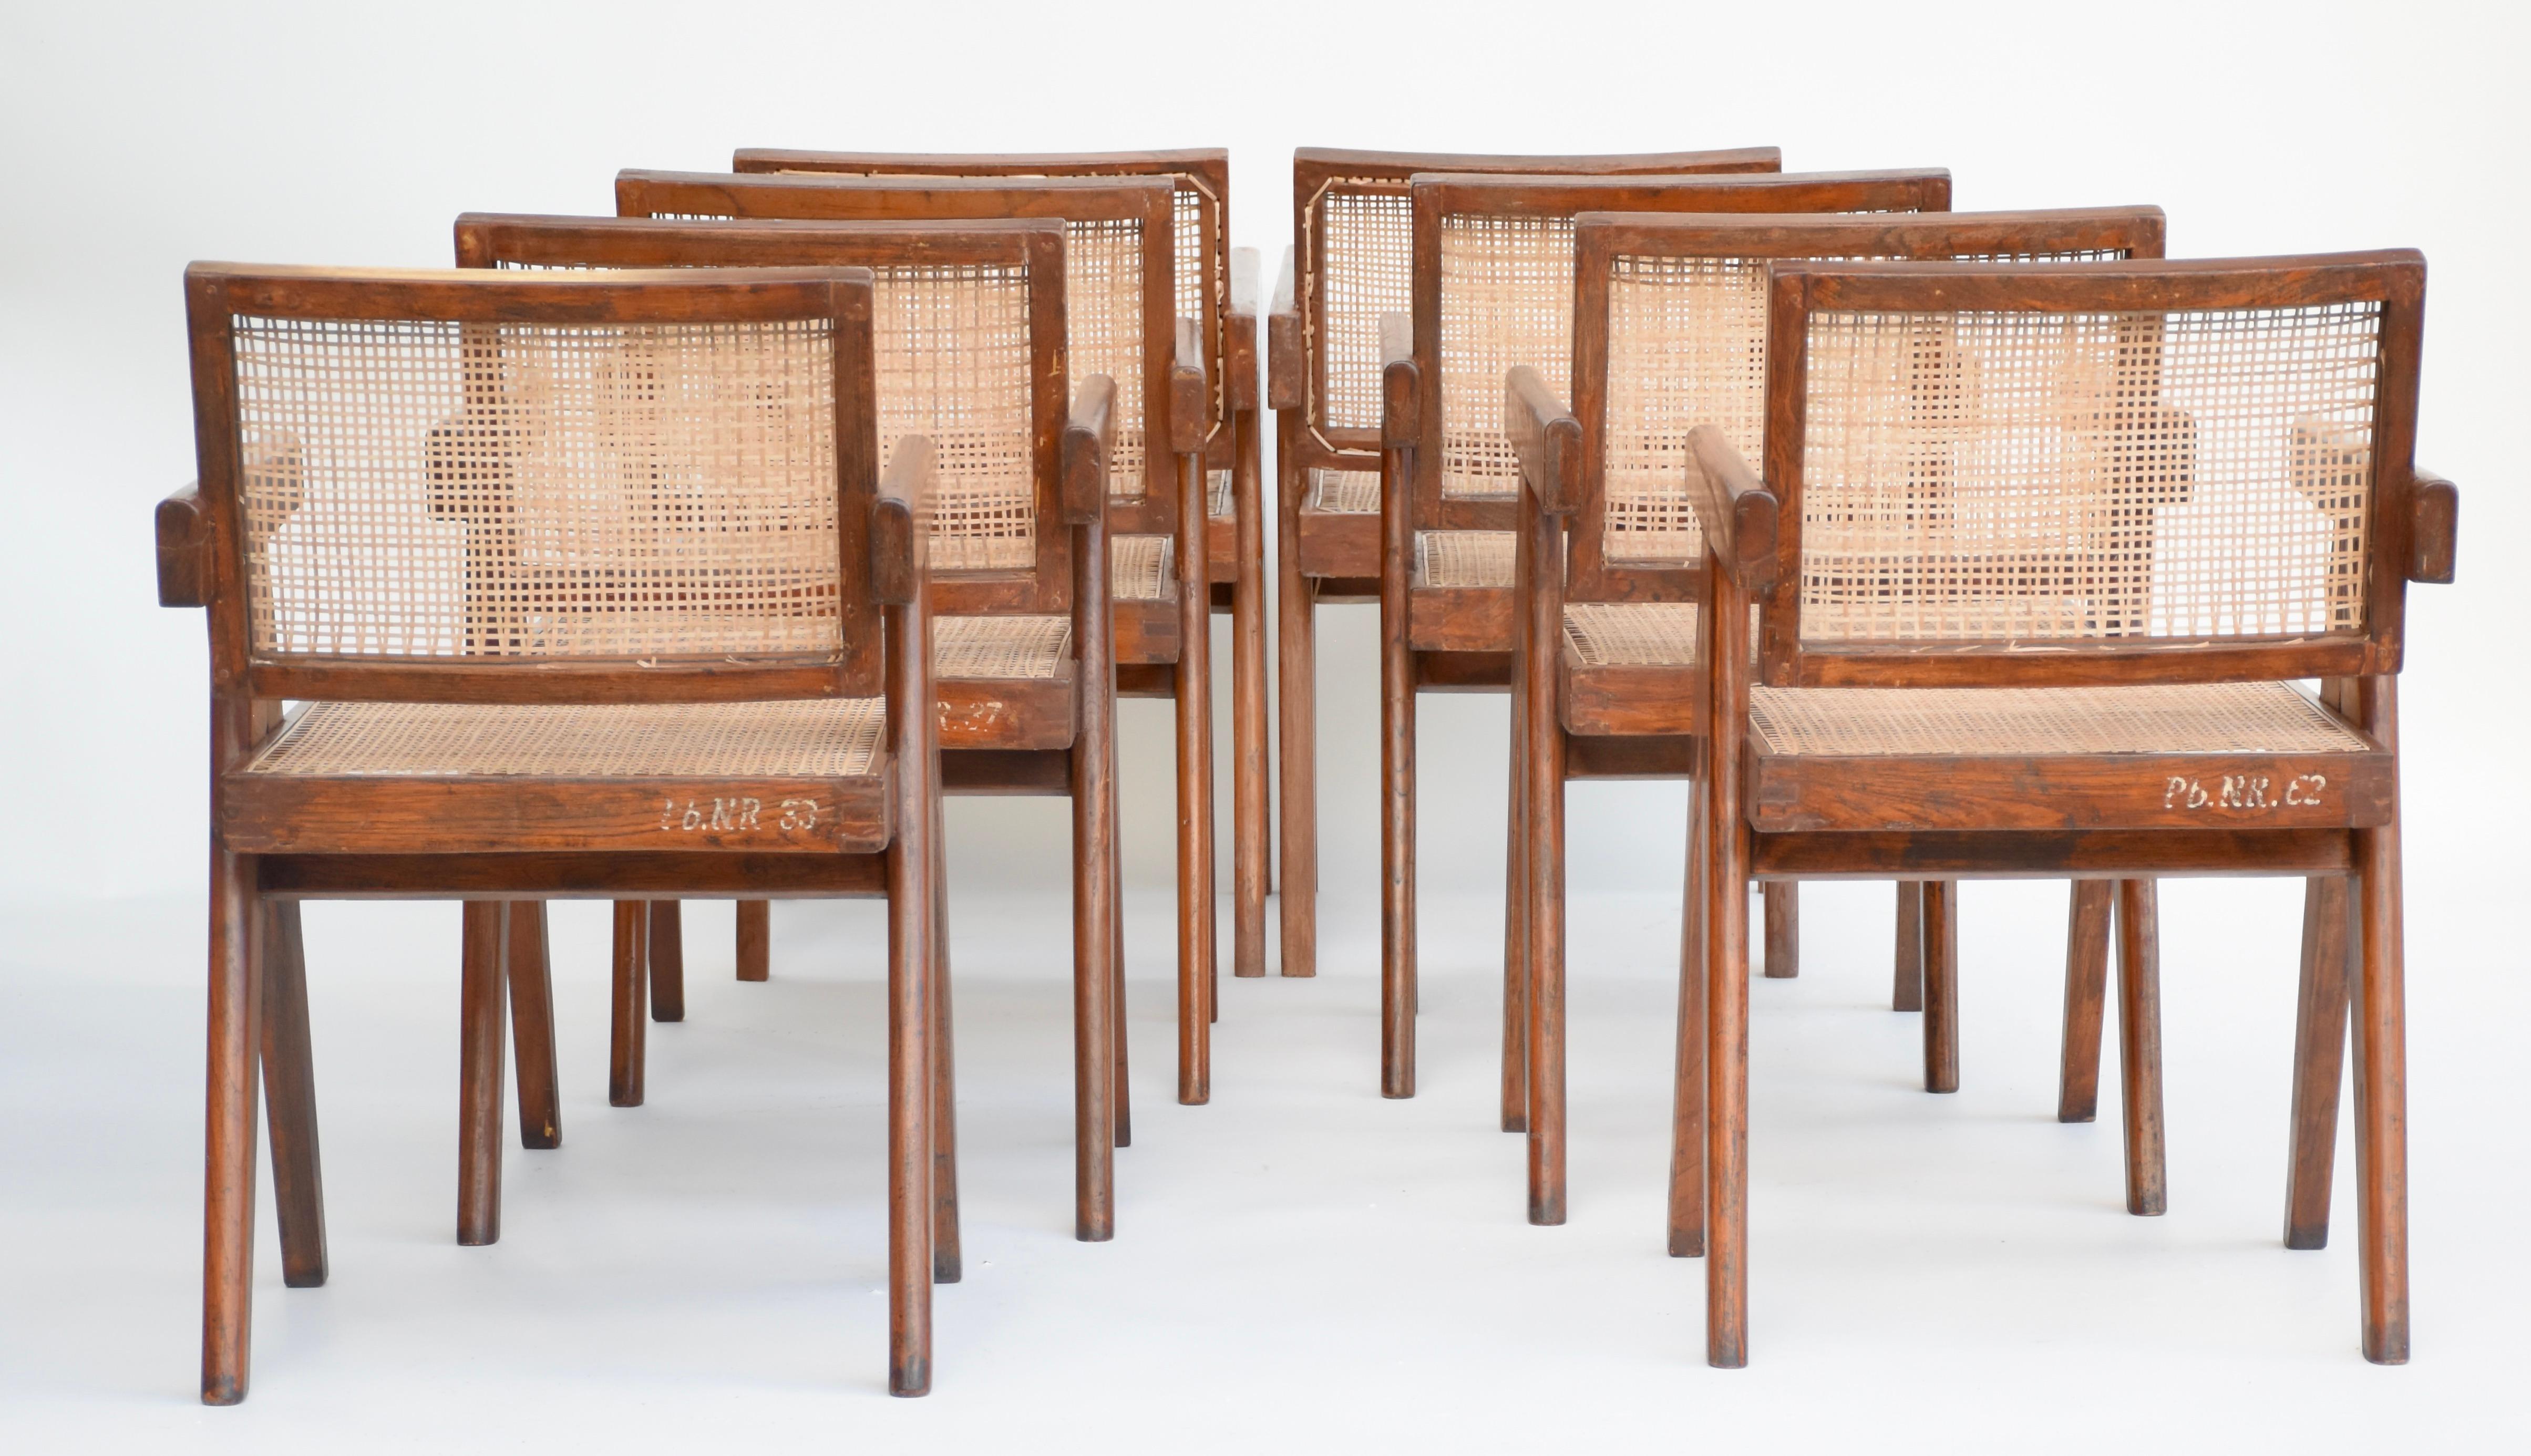 Pierre Jeanneret Set of 8 Office Cane Chairs Ca. 1955-1960 from Chandigarh For Sale 2